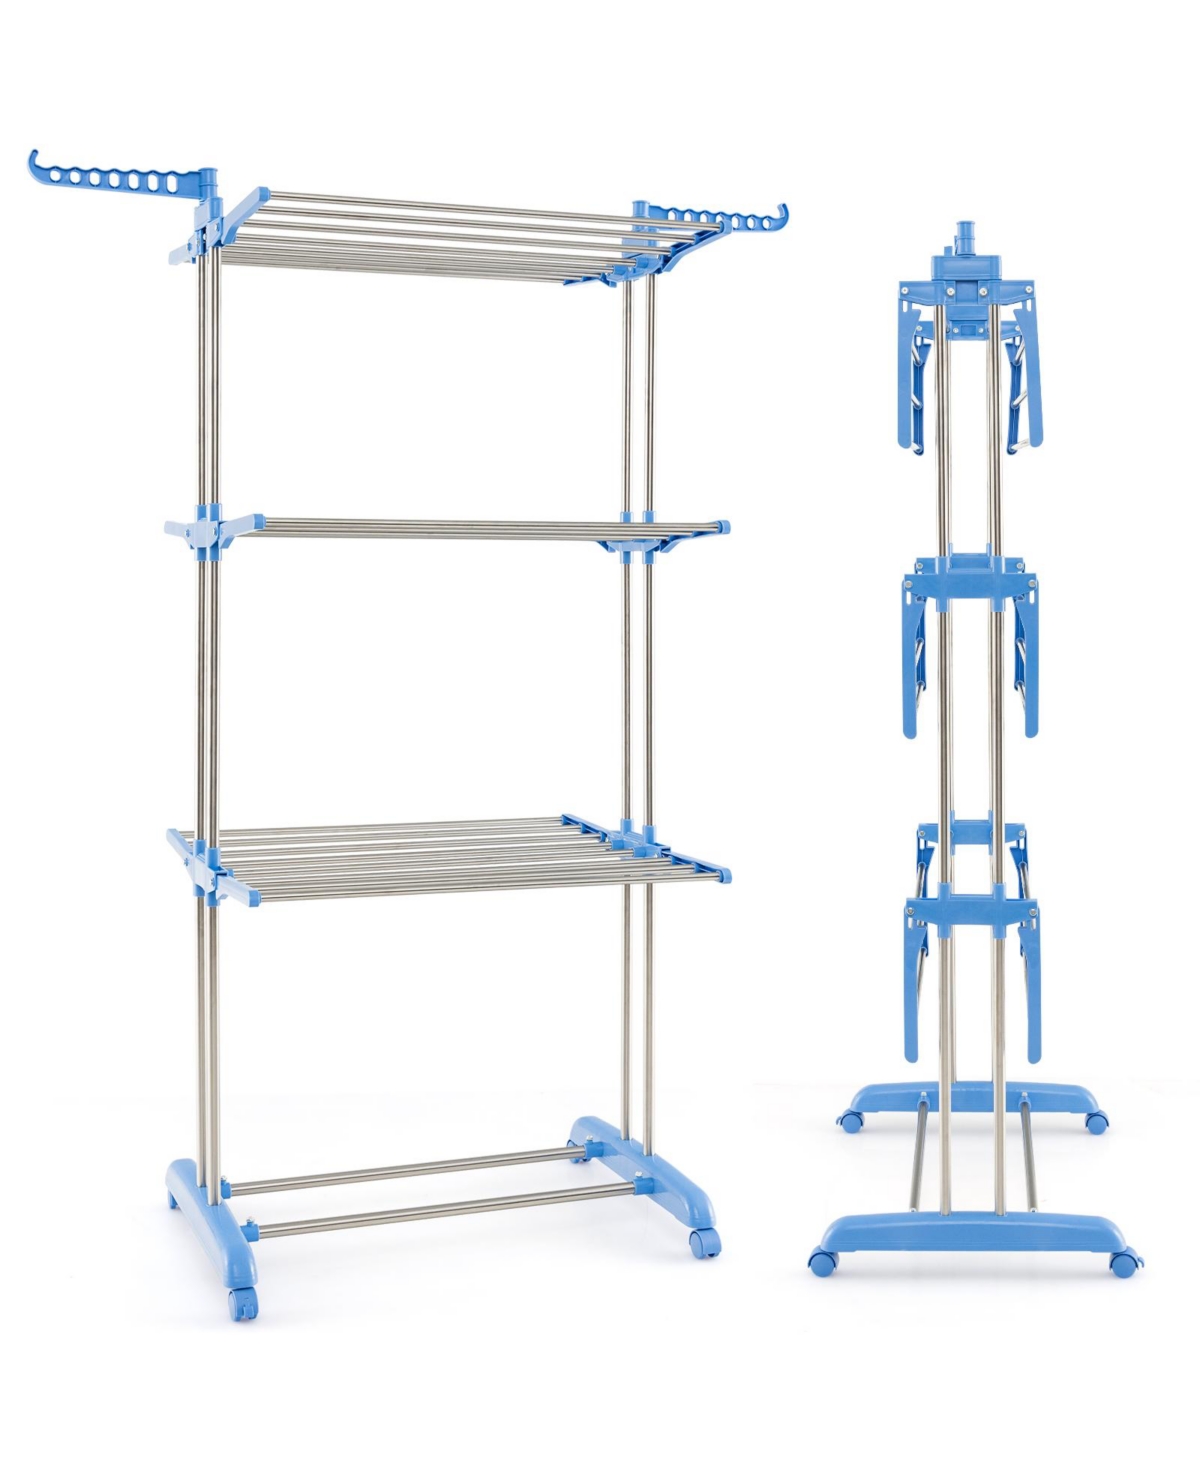 4-tier Folding Clothes Drying Rack with Rotatable Side Wings & Collapsible Shelves - Blue